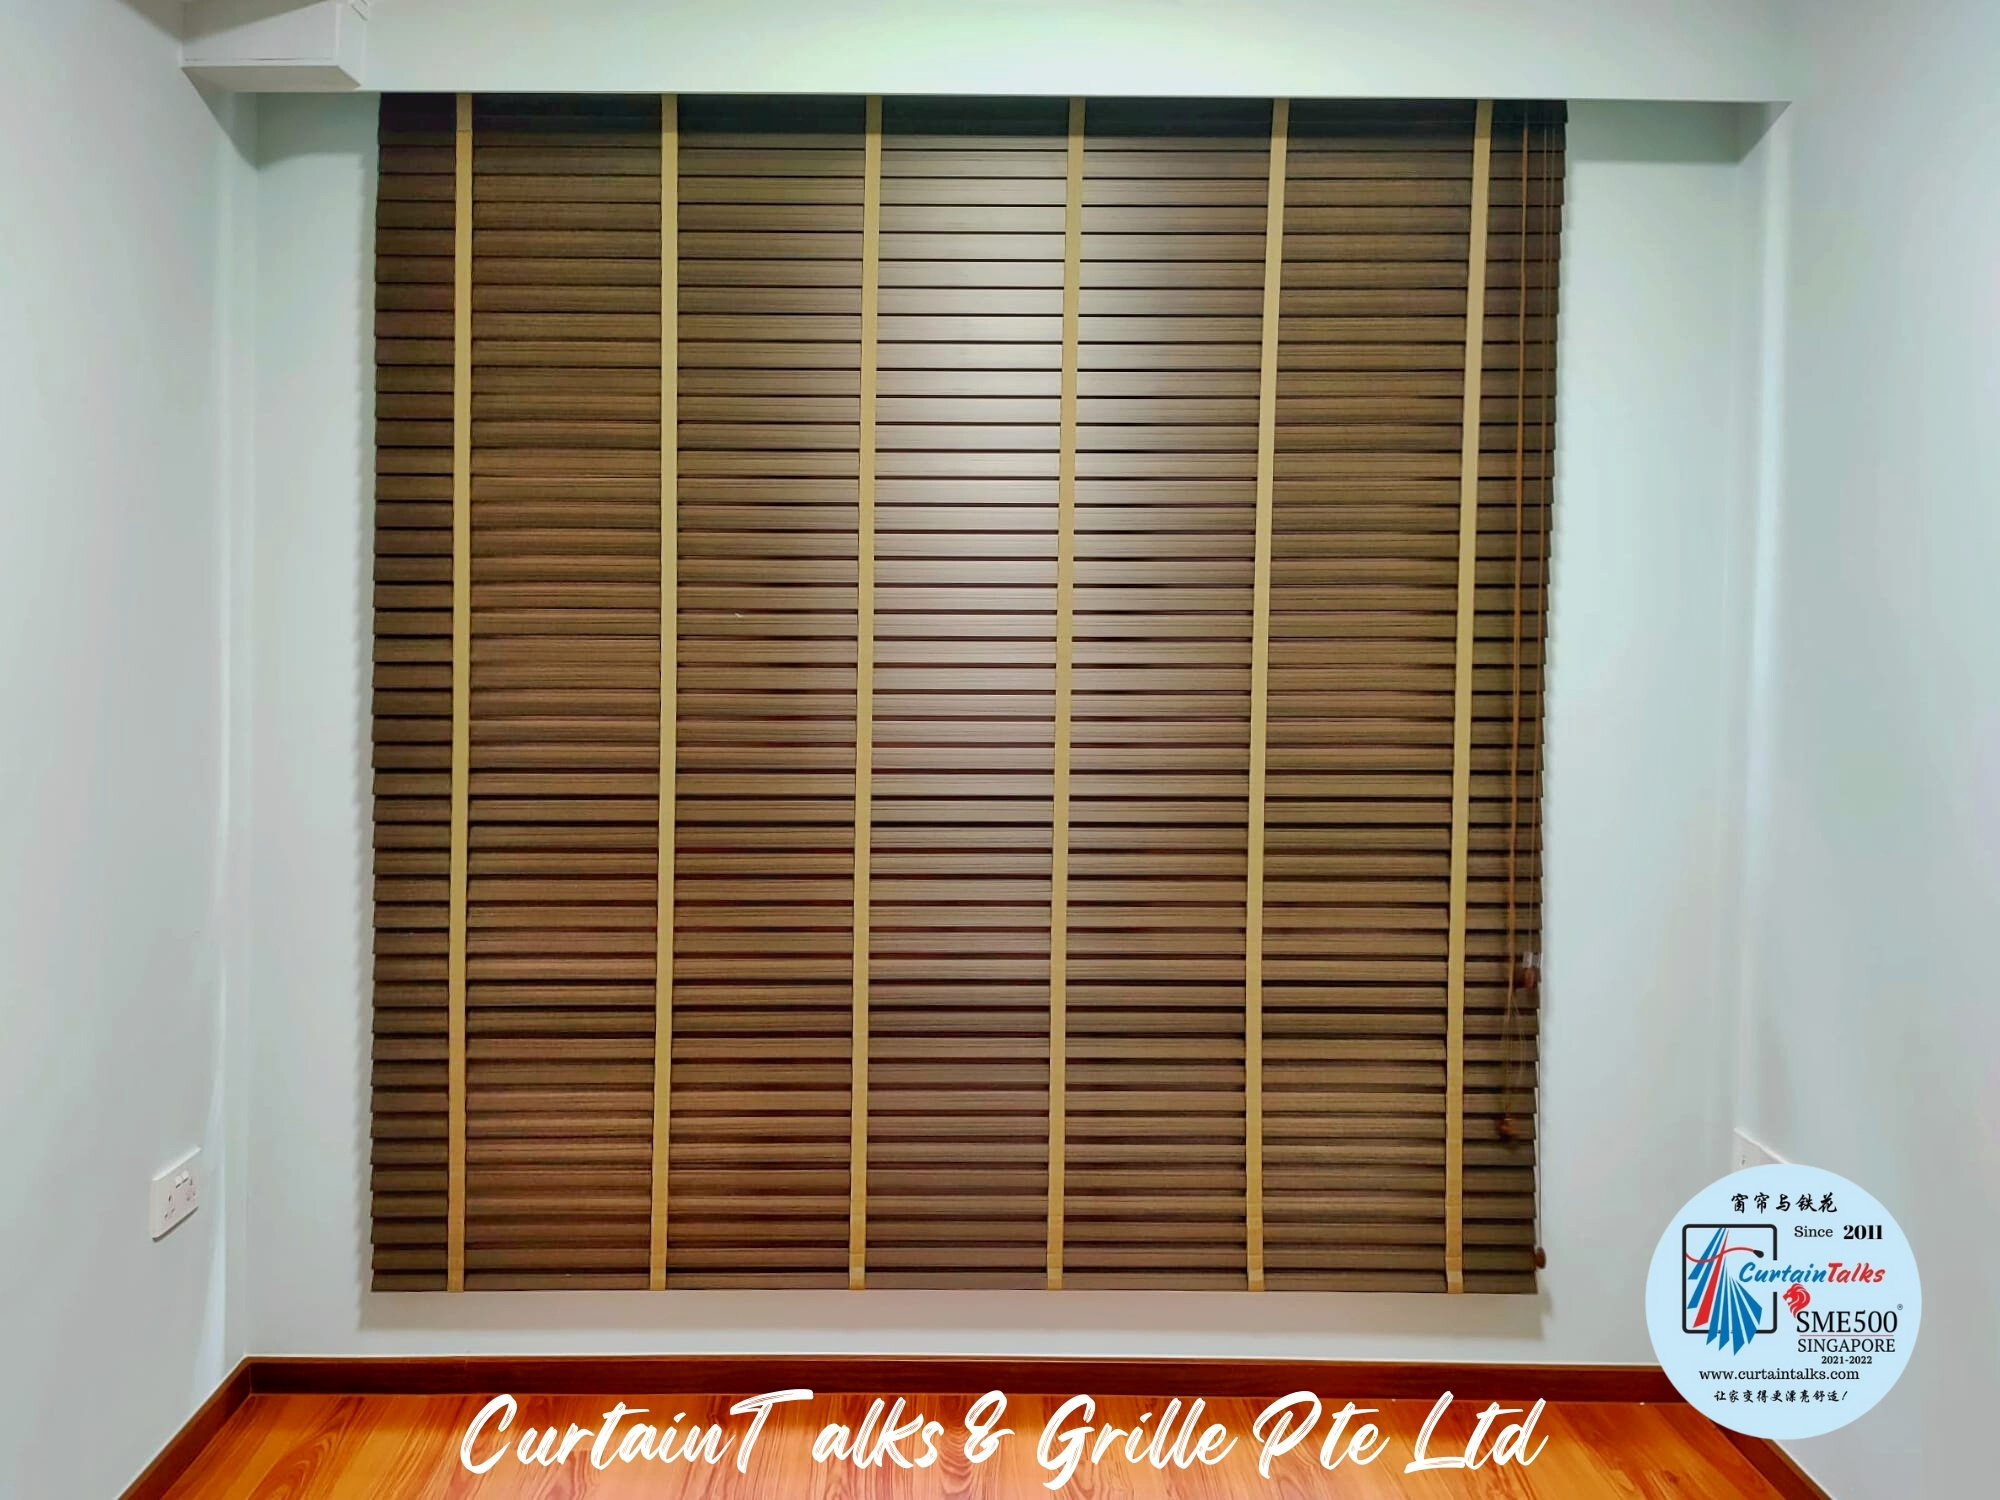 This is a Picture of Wooden blinds at Singapore HDB flat 94 dawson road,common room